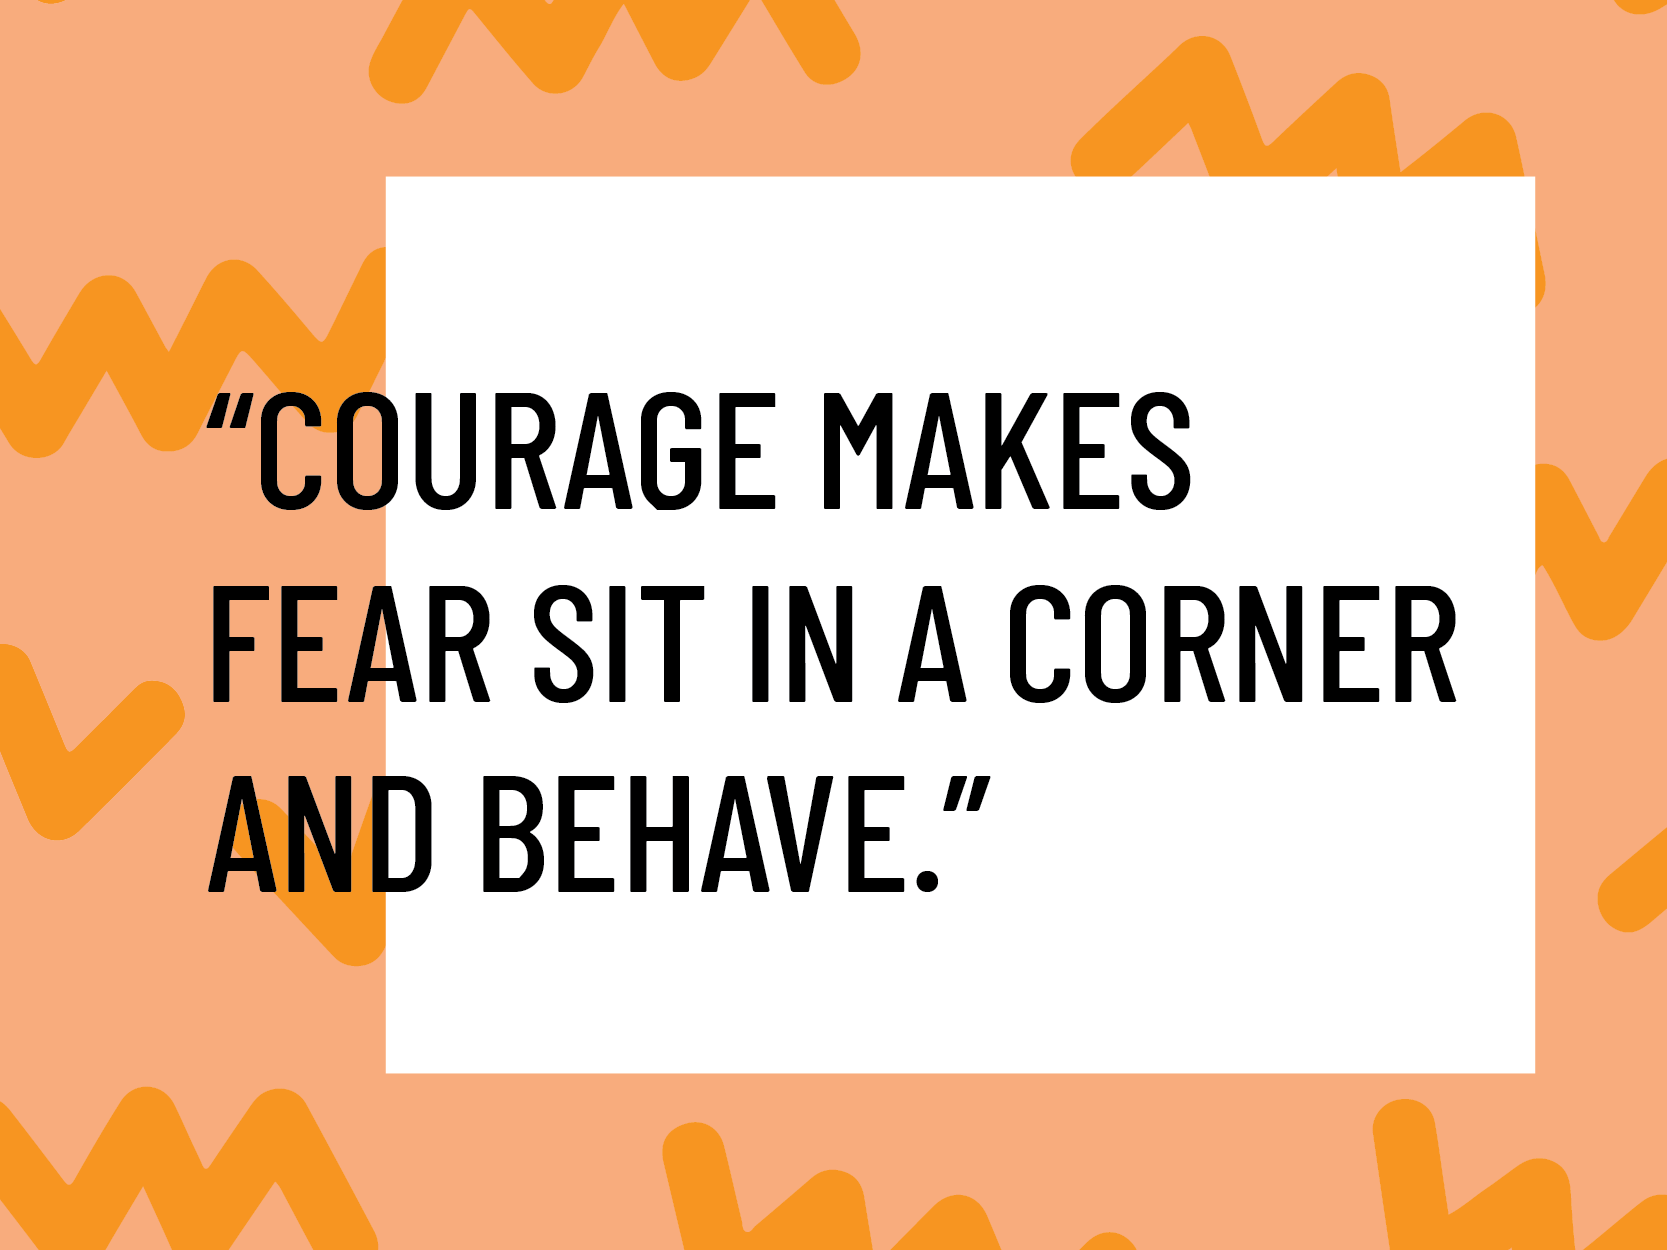 brave meaning vs courage